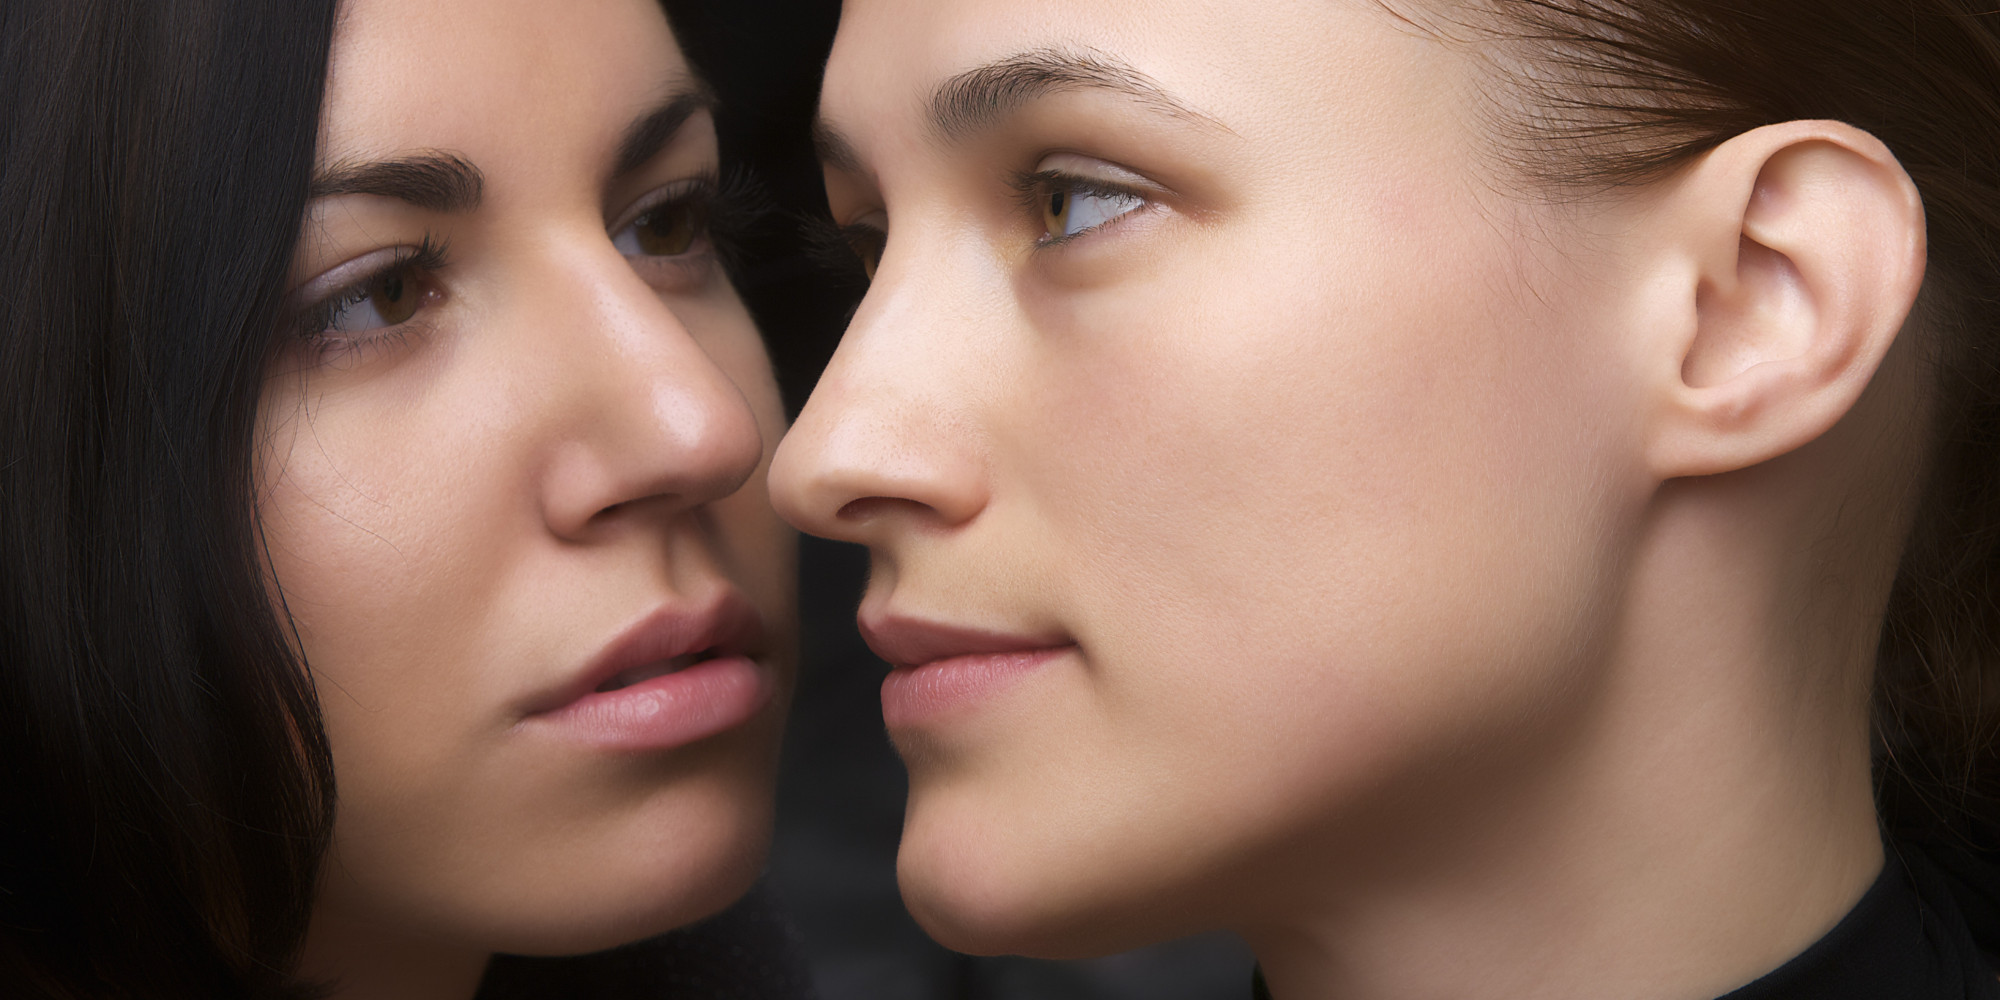 The Real Reasons Lesbians Date Straight Women | HuffPost